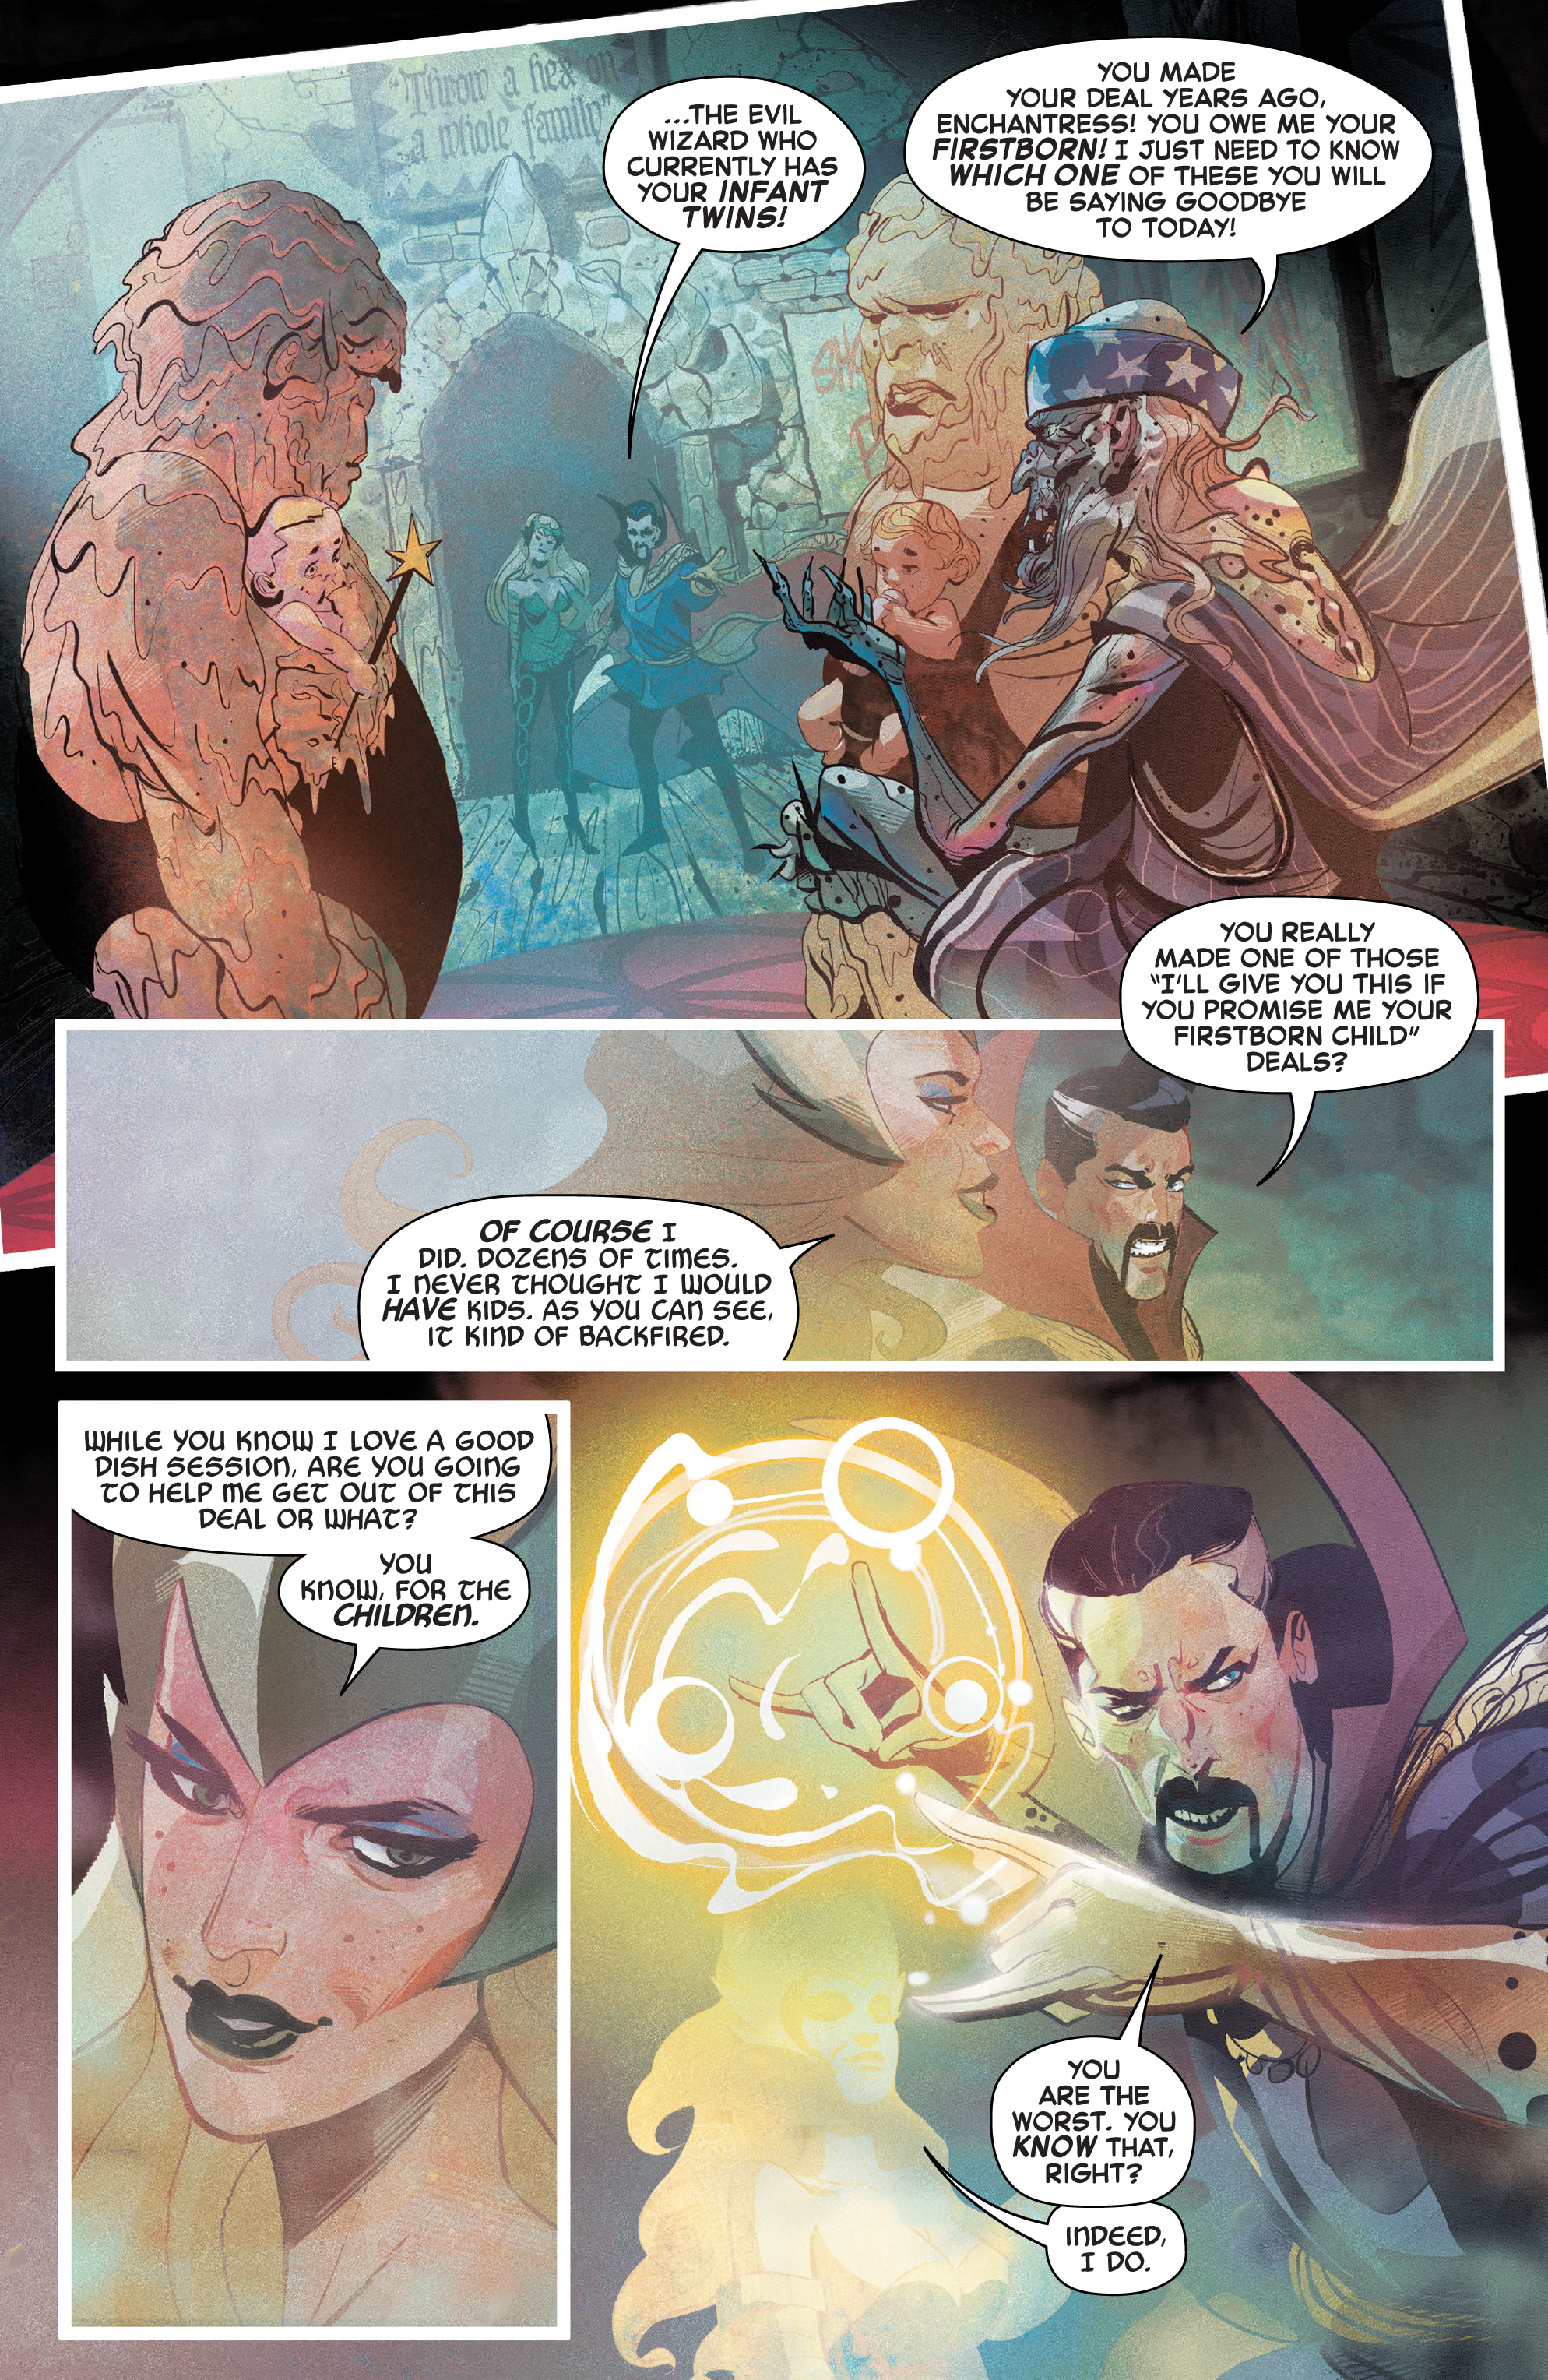 Strange Academy Presents: The Death of Doctor Strange (2021): Chapter 1 - Page 4